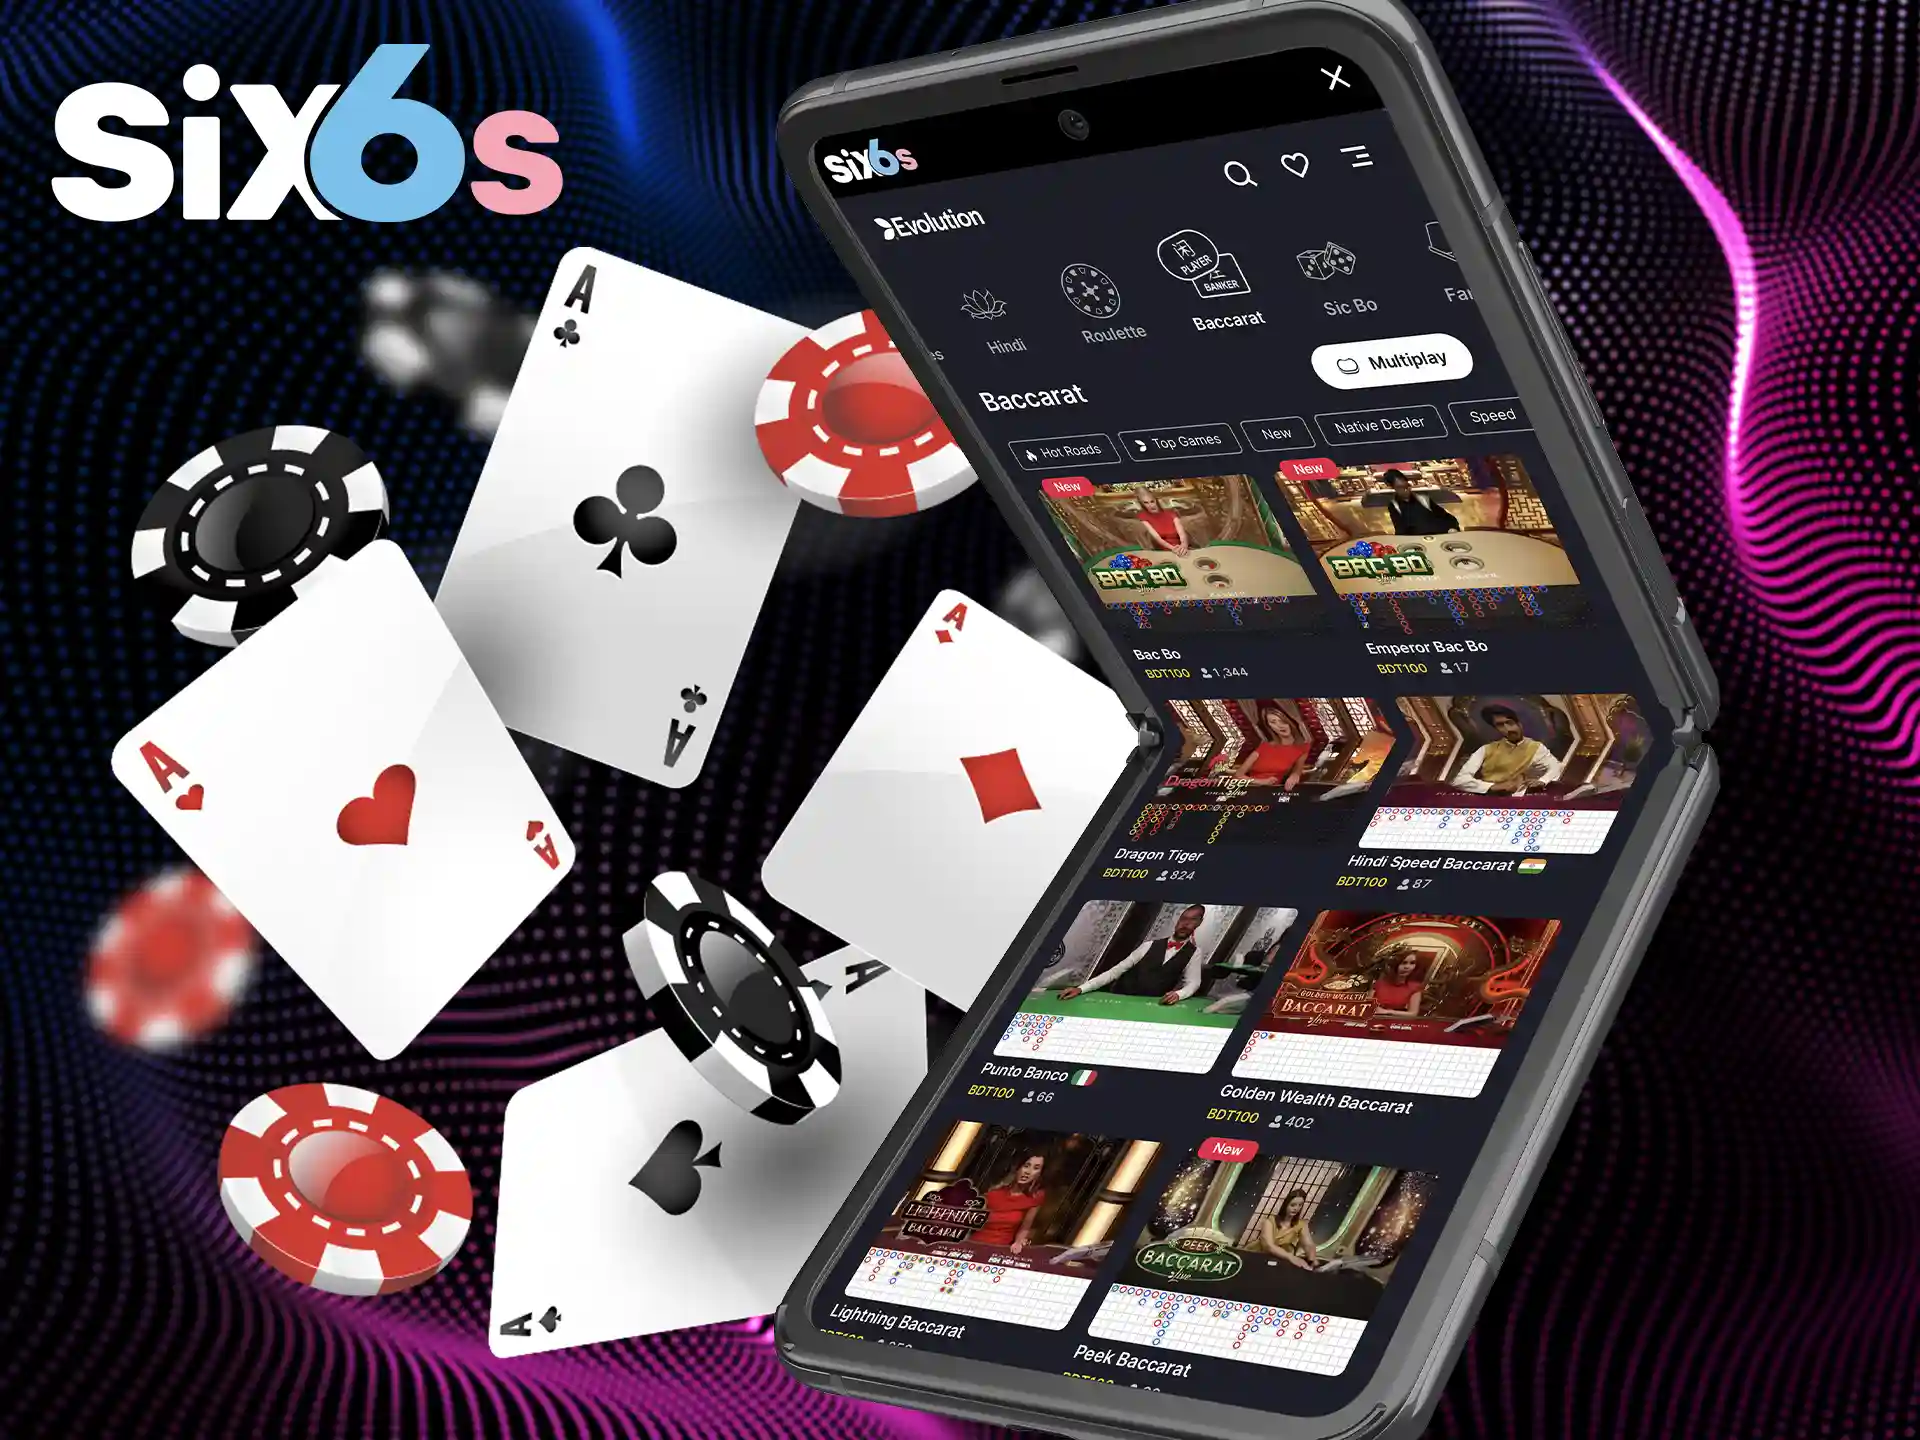 Collect a combination of 9 cards and win in the online baccarat game at Six6s.